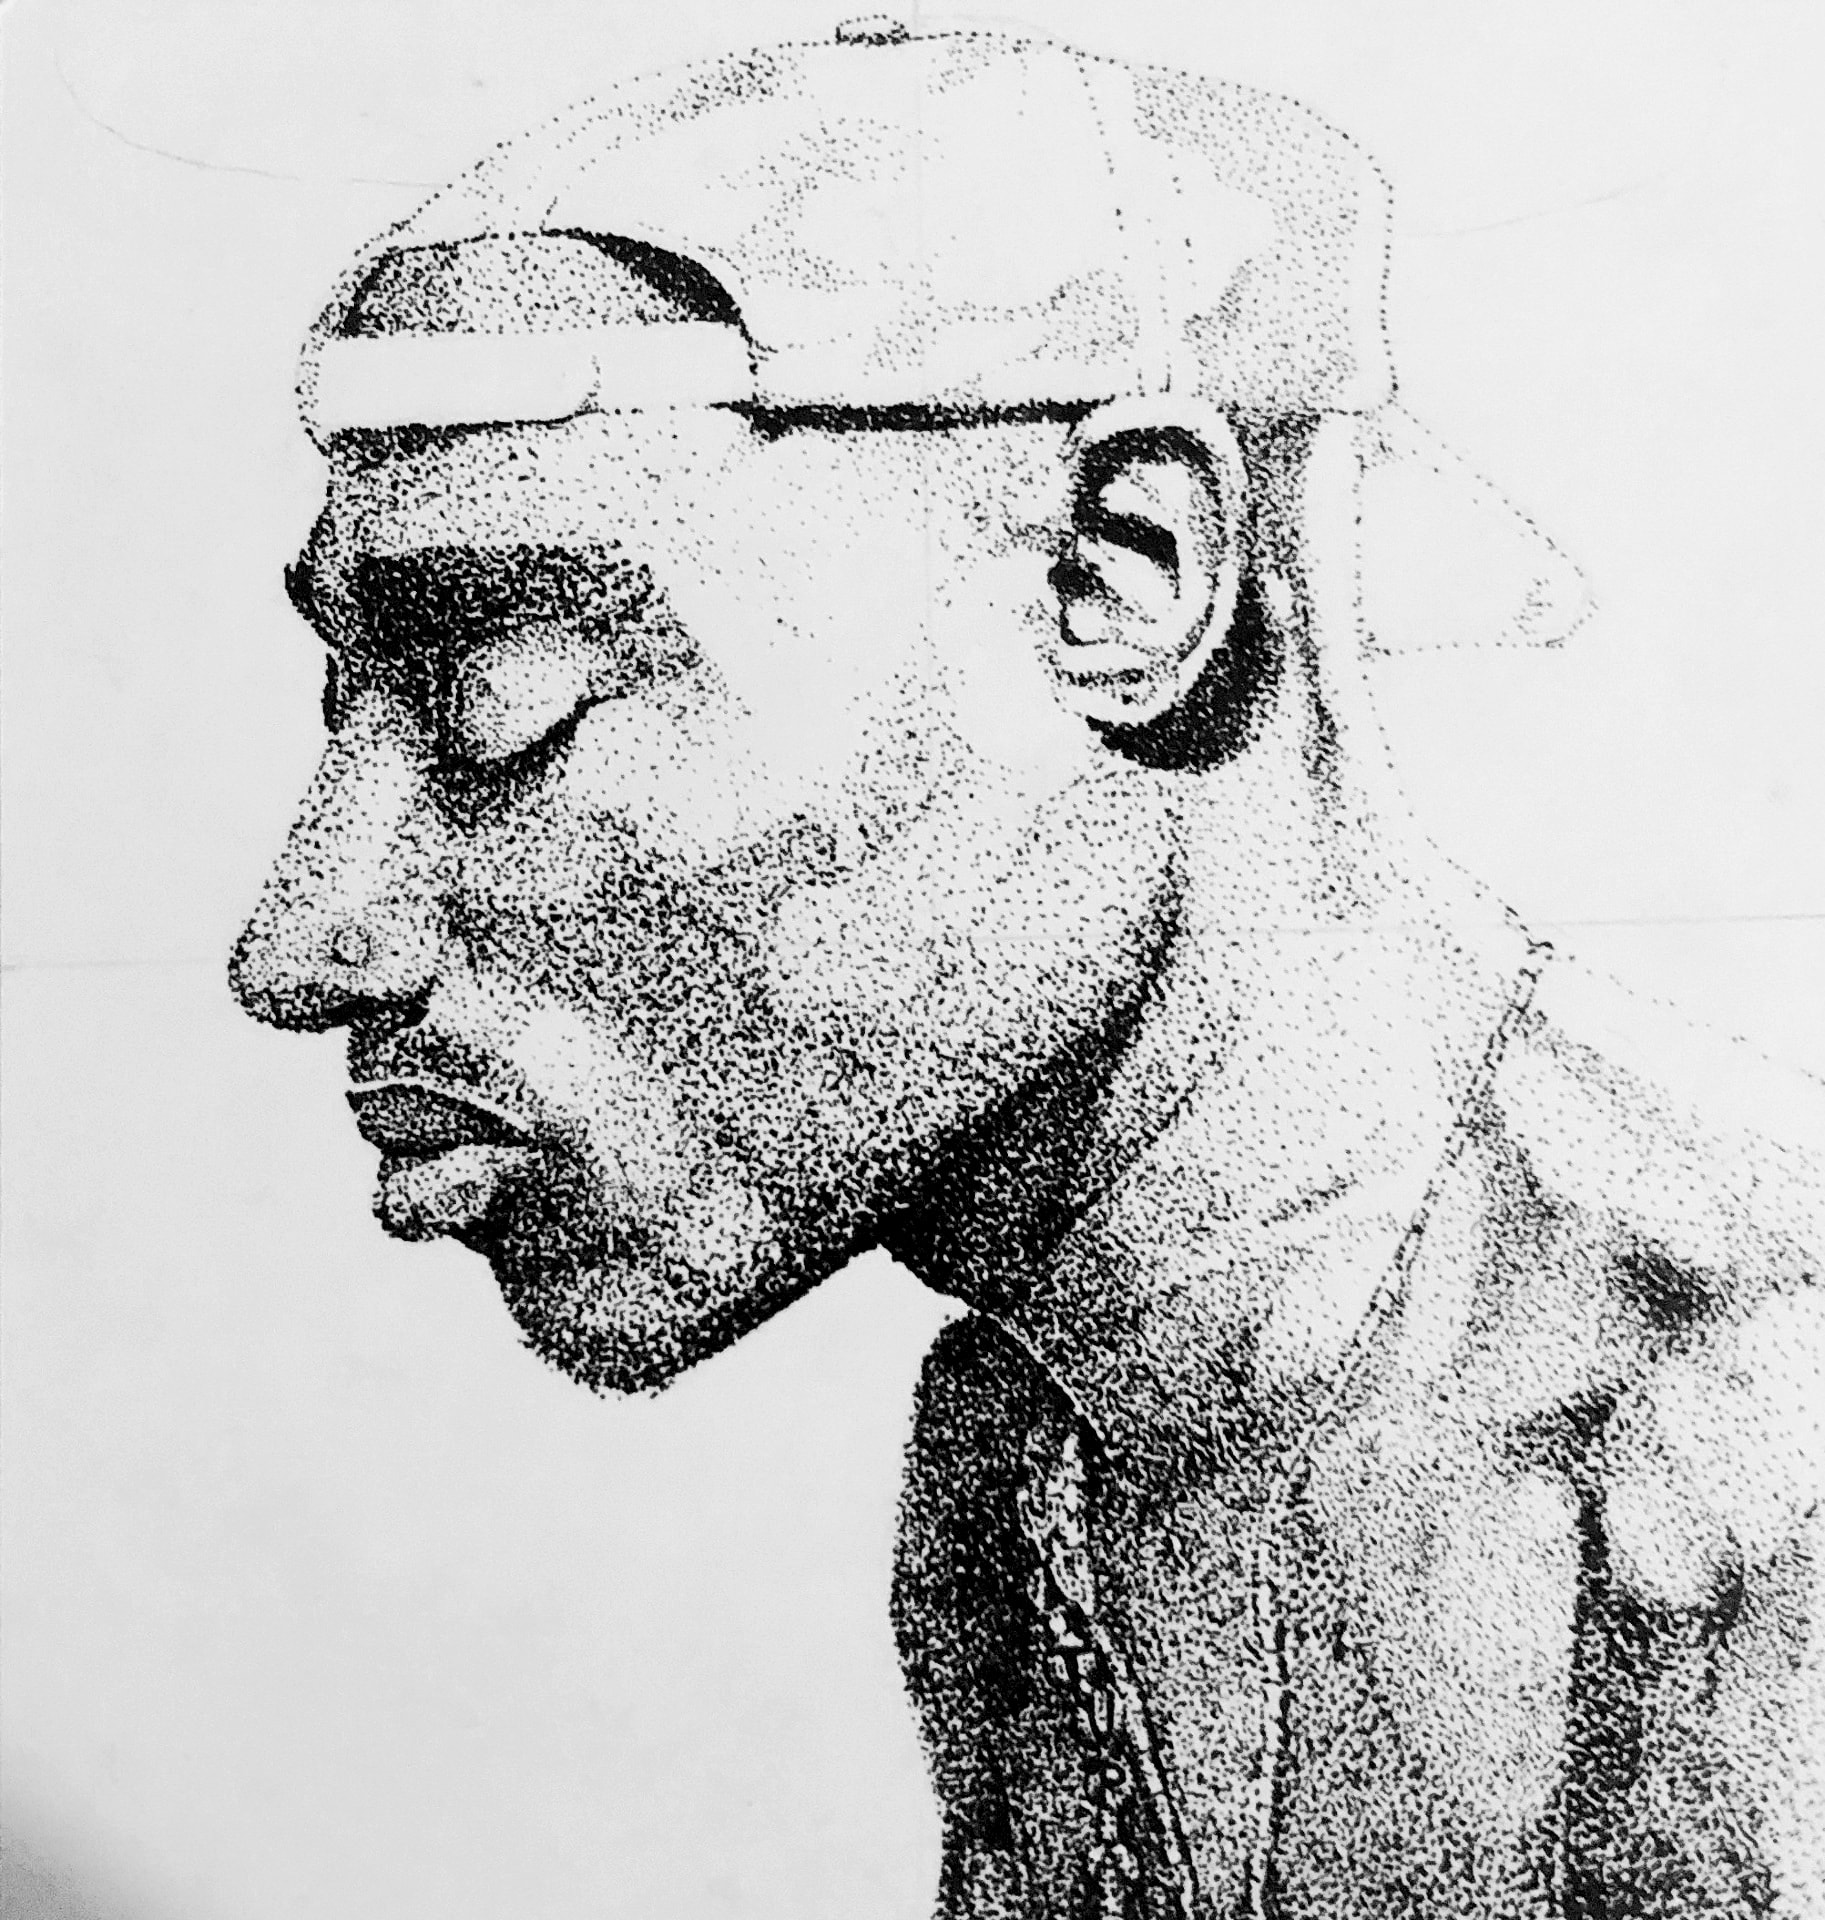 Black and white drawing of Tupac in profile facing left with his eyes closed